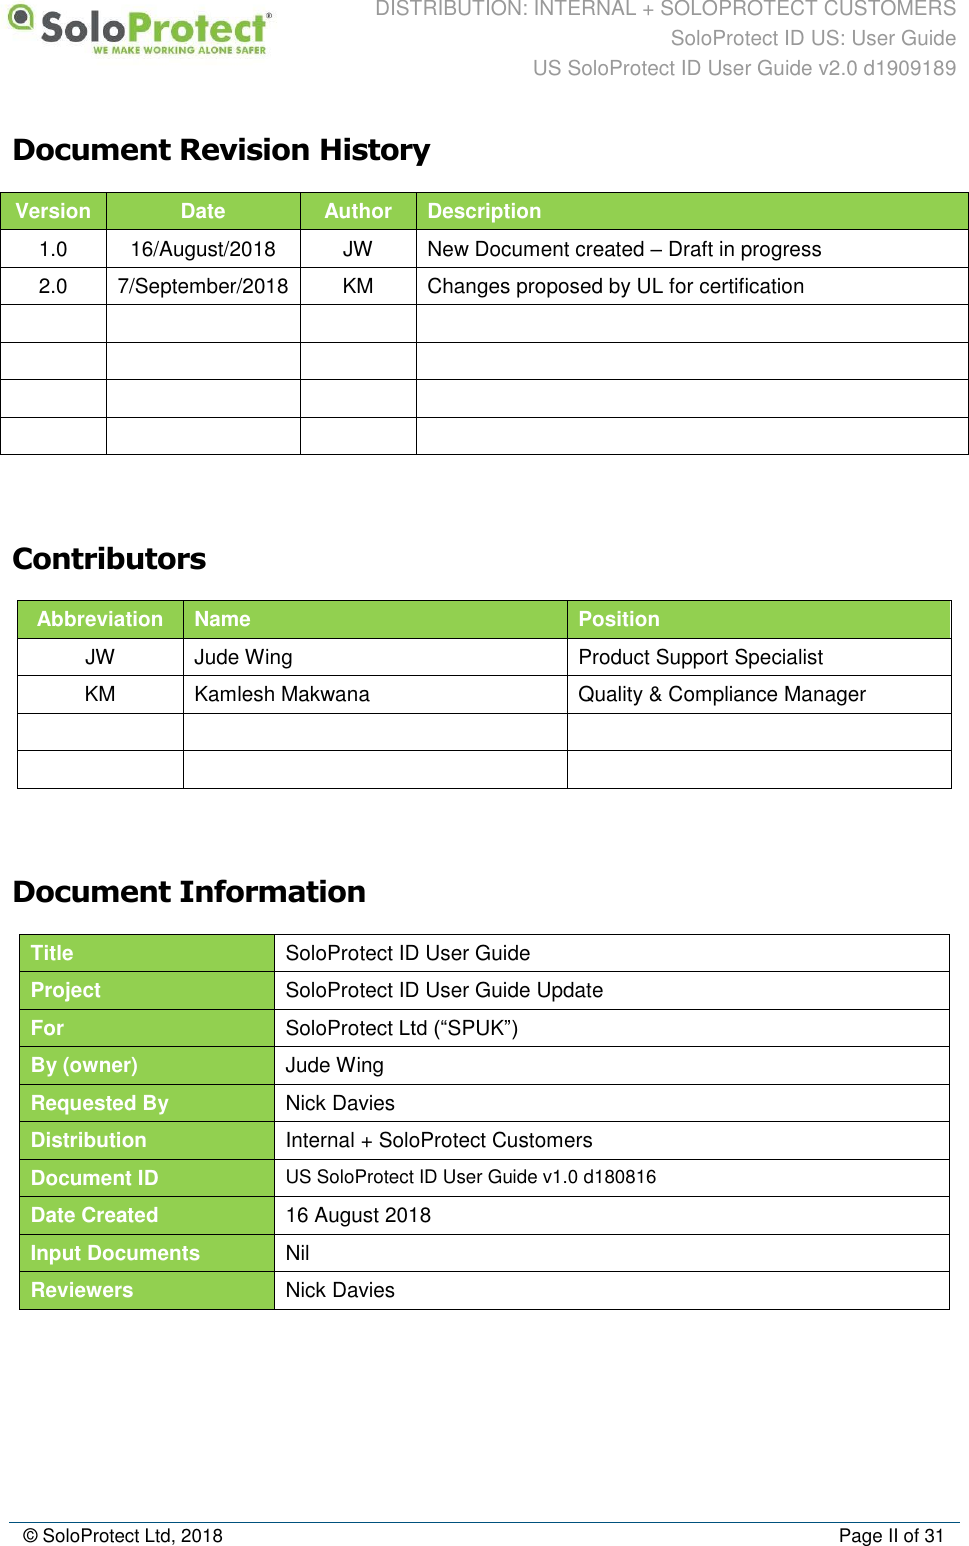 DISTRIBUTION: INTERNAL + SOLOPROTECT CUSTOMERS SoloProtect ID US: User Guide US SoloProtect ID User Guide v2.0 d1909189  © SoloProtect Ltd, 2018  Page II of 31 Document Revision History Version Date Author Description 1.0 16/August/2018 JW New Document created – Draft in progress 2.0 7/September/2018 KM Changes proposed by UL for certification                   Contributors Abbreviation Name Position JW Jude Wing Product Support Specialist KM Kamlesh Makwana Quality &amp; Compliance Manager         Document Information Title SoloProtect ID User Guide Project SoloProtect ID User Guide Update For SoloProtect Ltd (“SPUK”)  By (owner) Jude Wing Requested By Nick Davies Distribution Internal + SoloProtect Customers Document ID US SoloProtect ID User Guide v1.0 d180816 Date Created 16 August 2018 Input Documents Nil Reviewers Nick Davies   